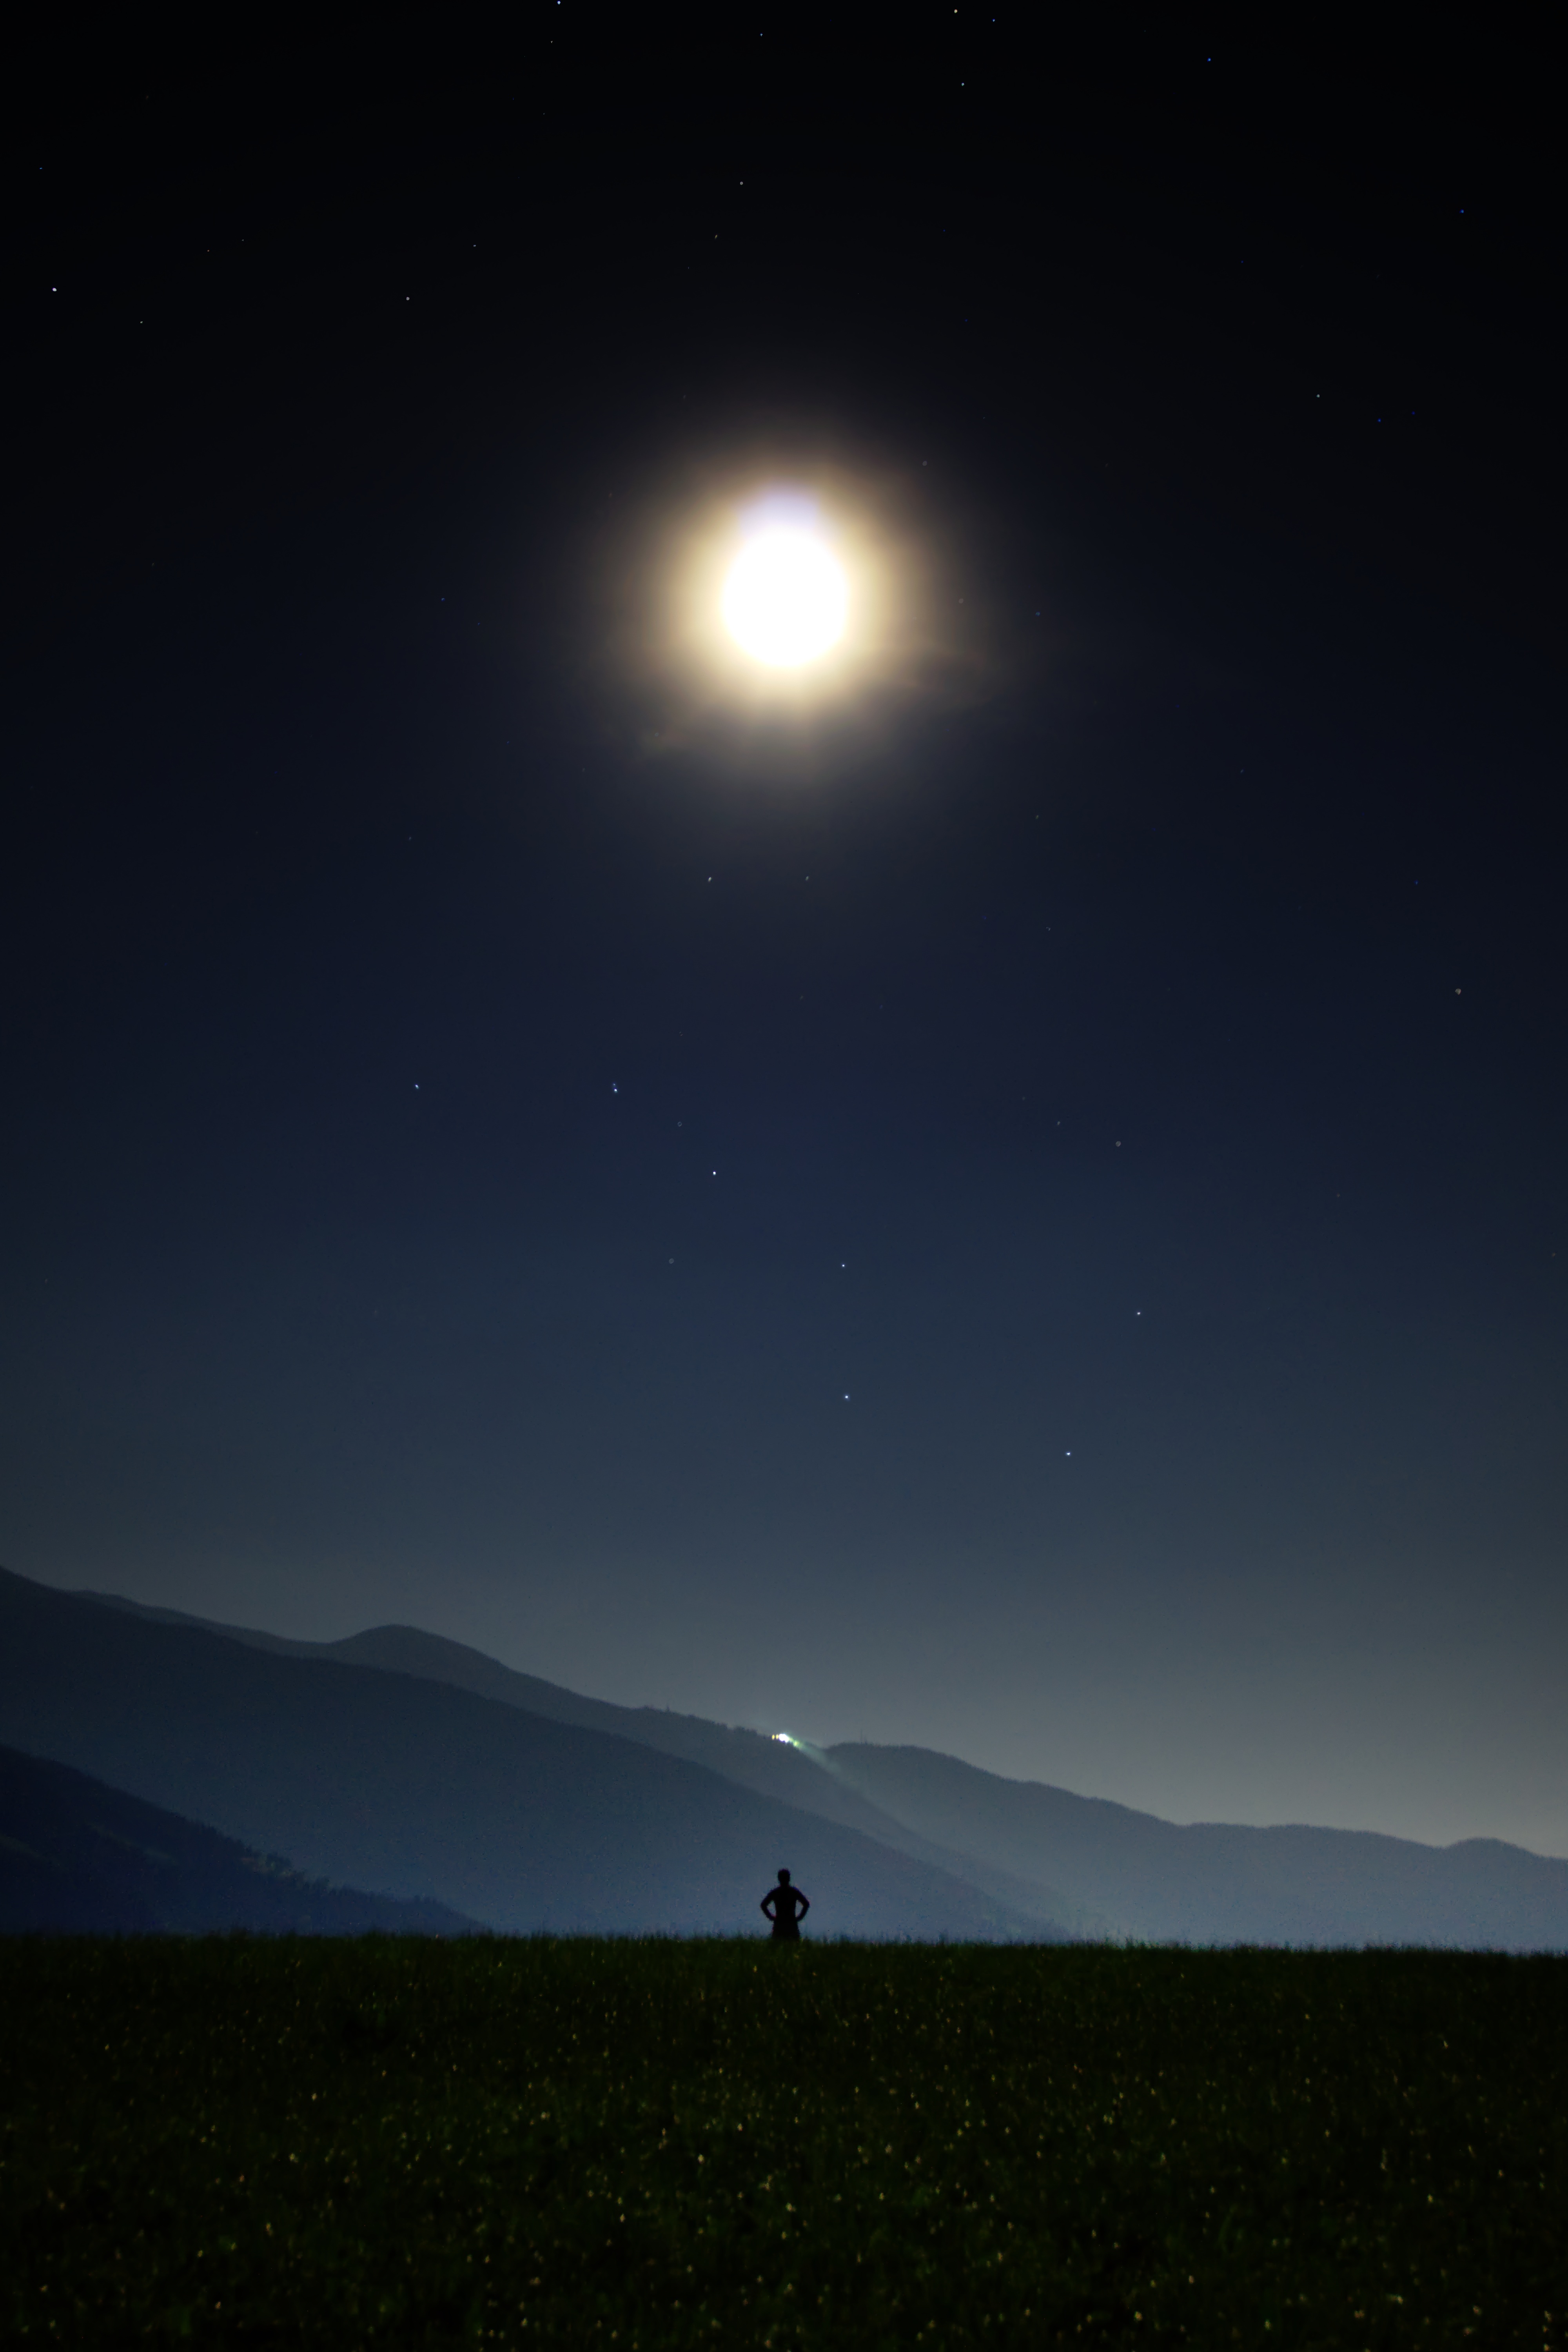 115742 download wallpaper human, dark, sky, stars, night, silhouette, field, person screensavers and pictures for free